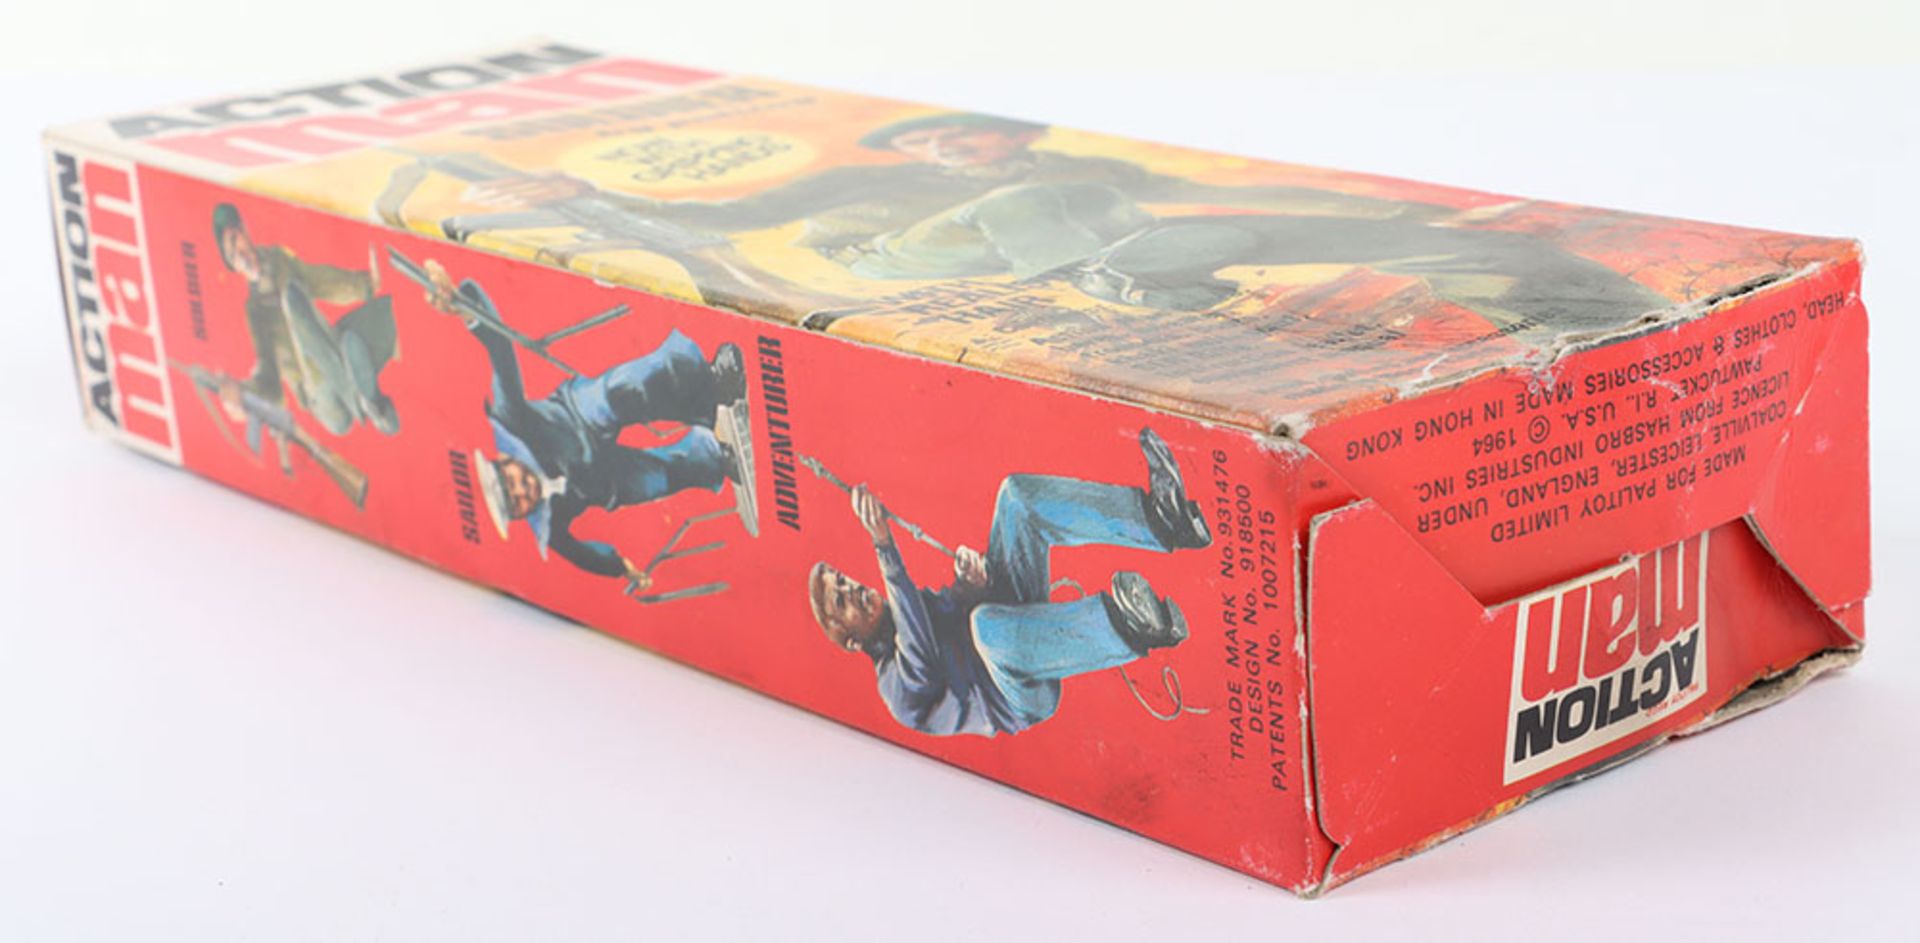 Action Man Boxed Vintage Soldier by Palitoy - Image 5 of 5